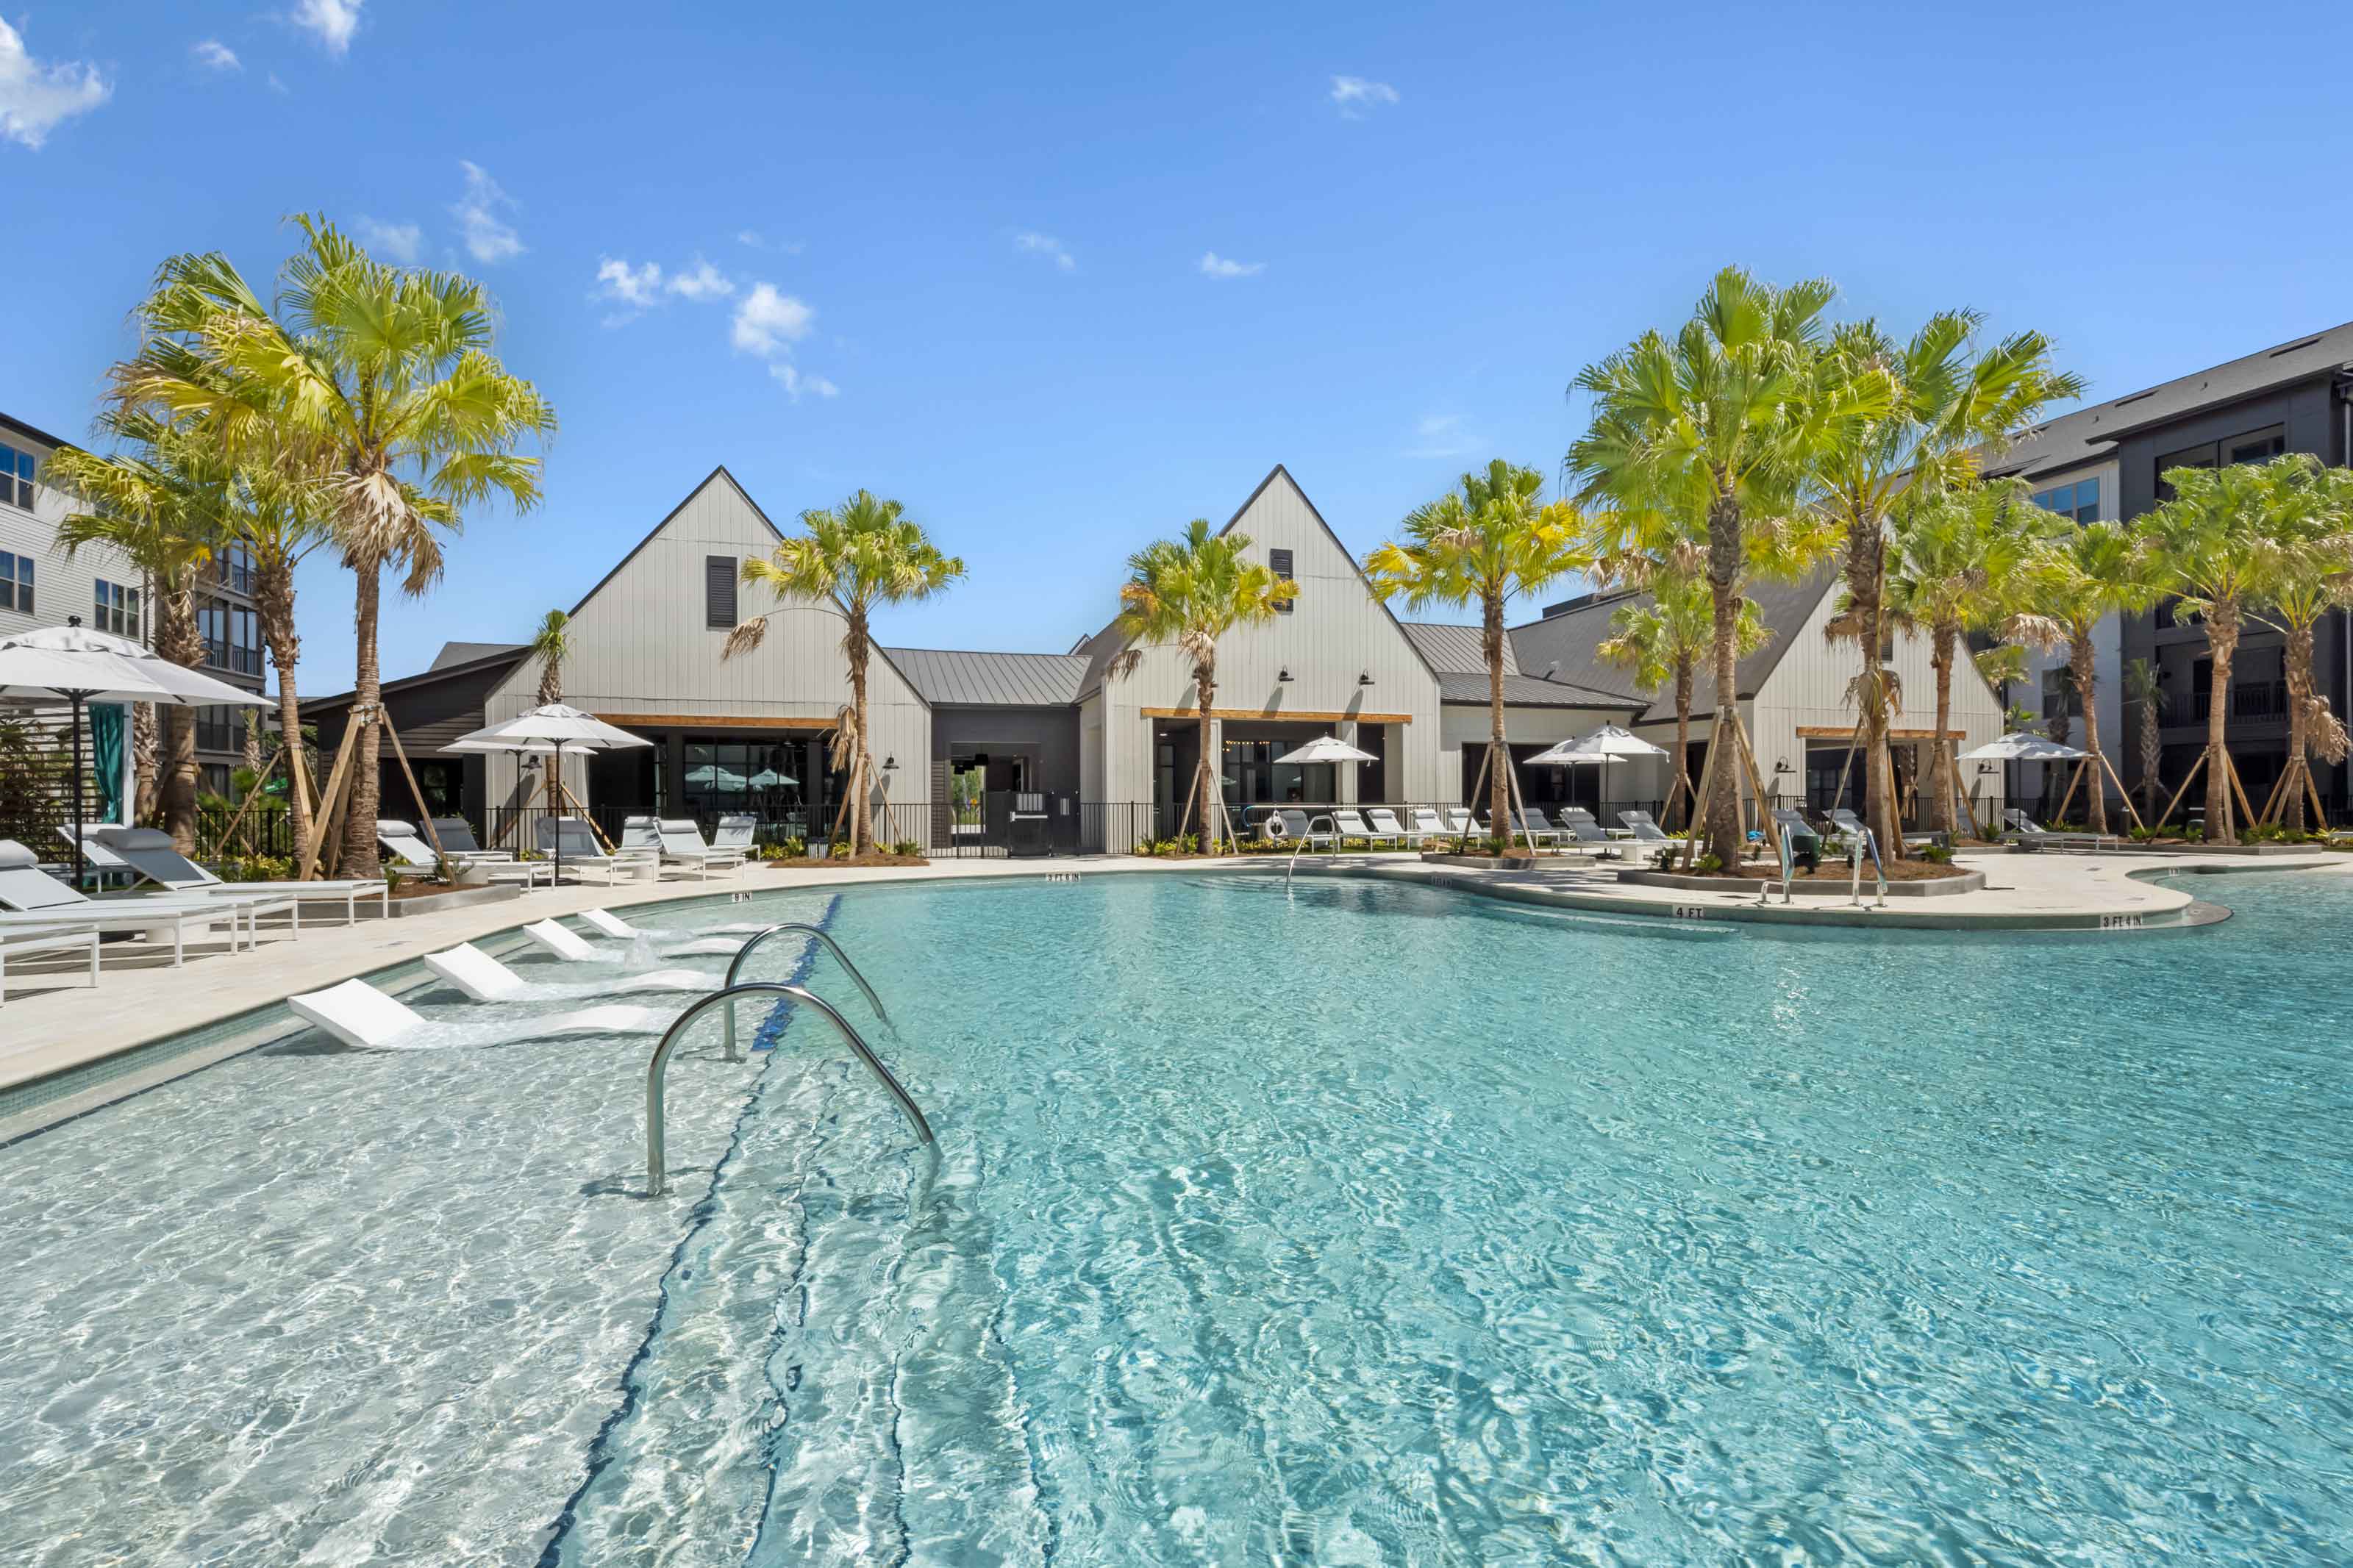 Everwell at Bexley Pool - Best new apartment development in Pasco County Land O' Lakes